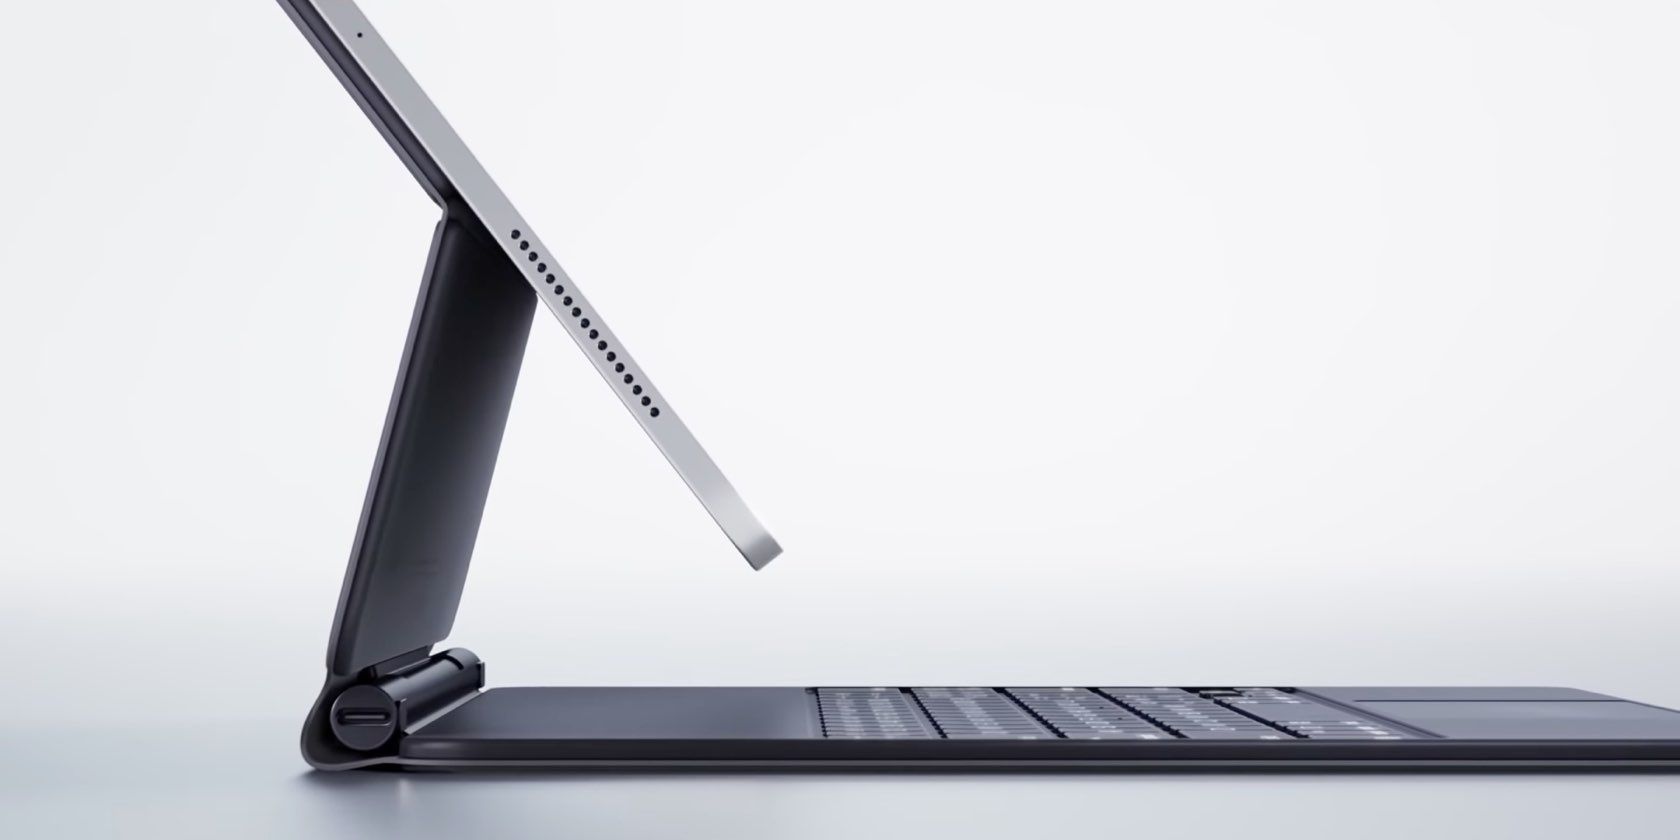 A profile view of a 12.9-inch iPad Pro (2018 model) suspended mid-air on a Magic Keyboard